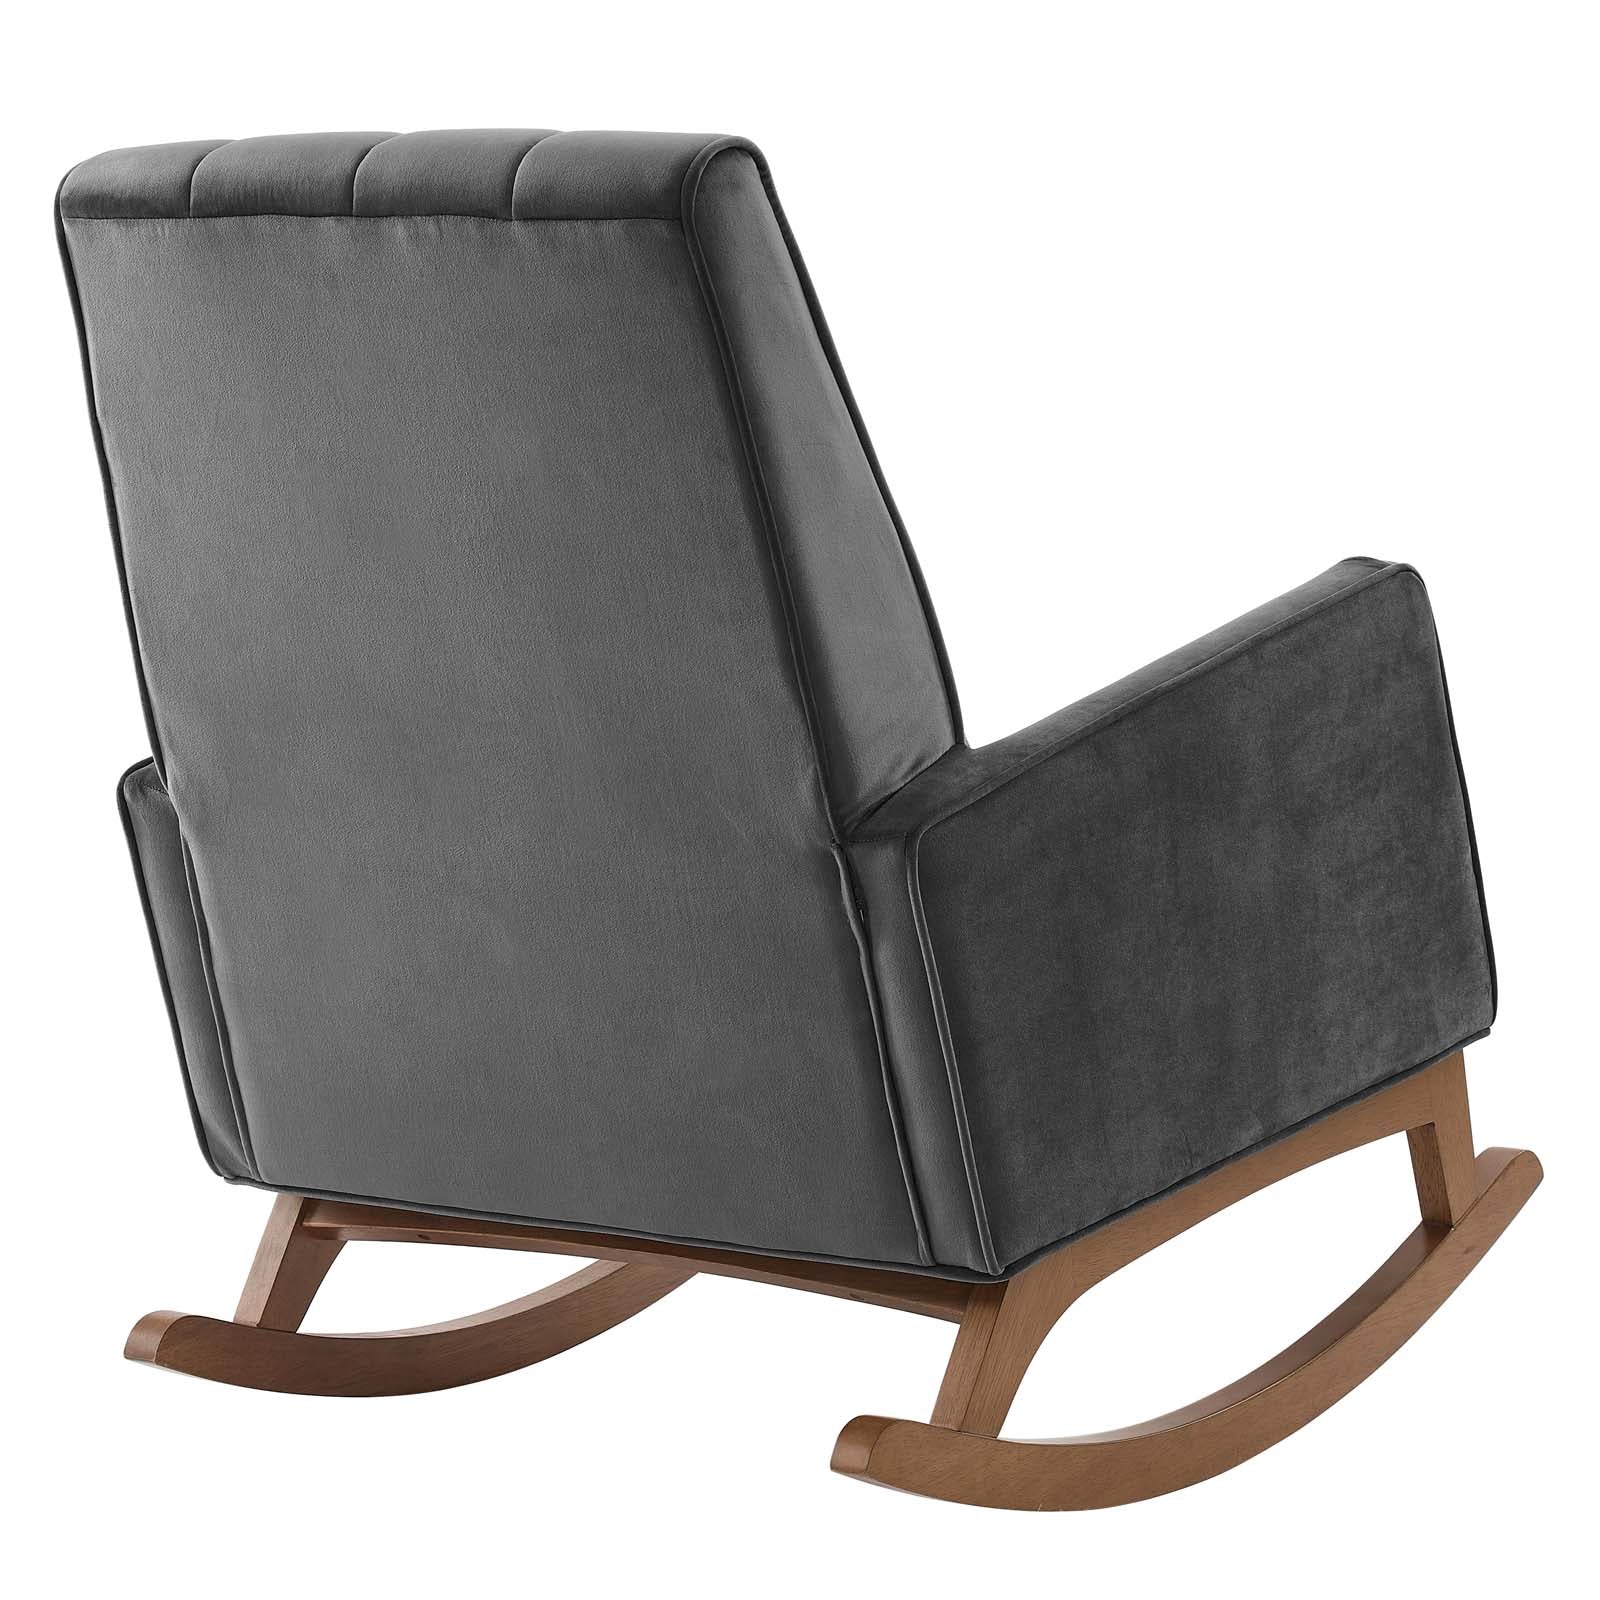 Sway Performance Velvet Rocking Chair-Rocking Chair-Modway-Wall2Wall Furnishings